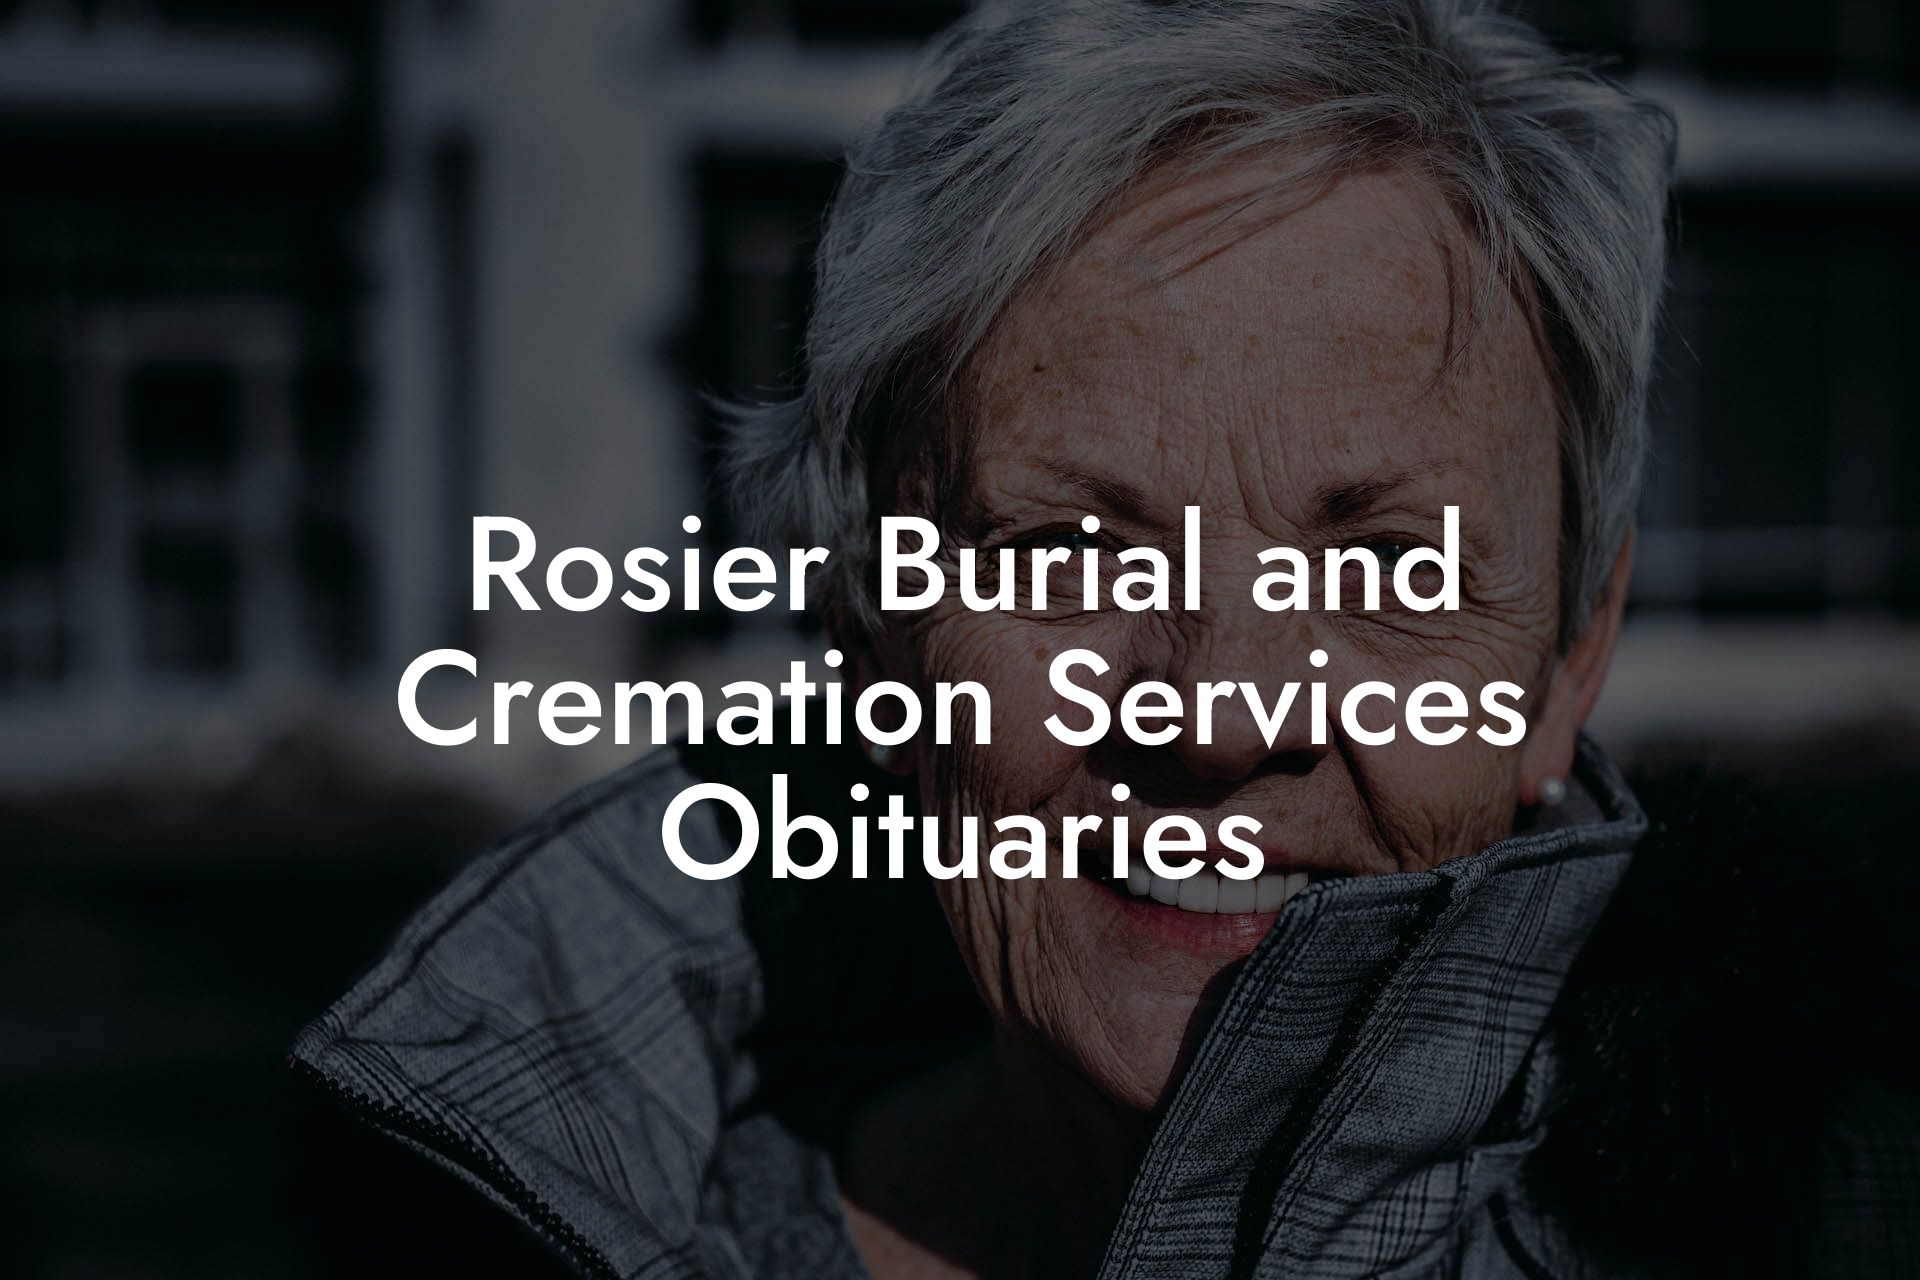 Rosier Burial and Cremation Services Obituaries